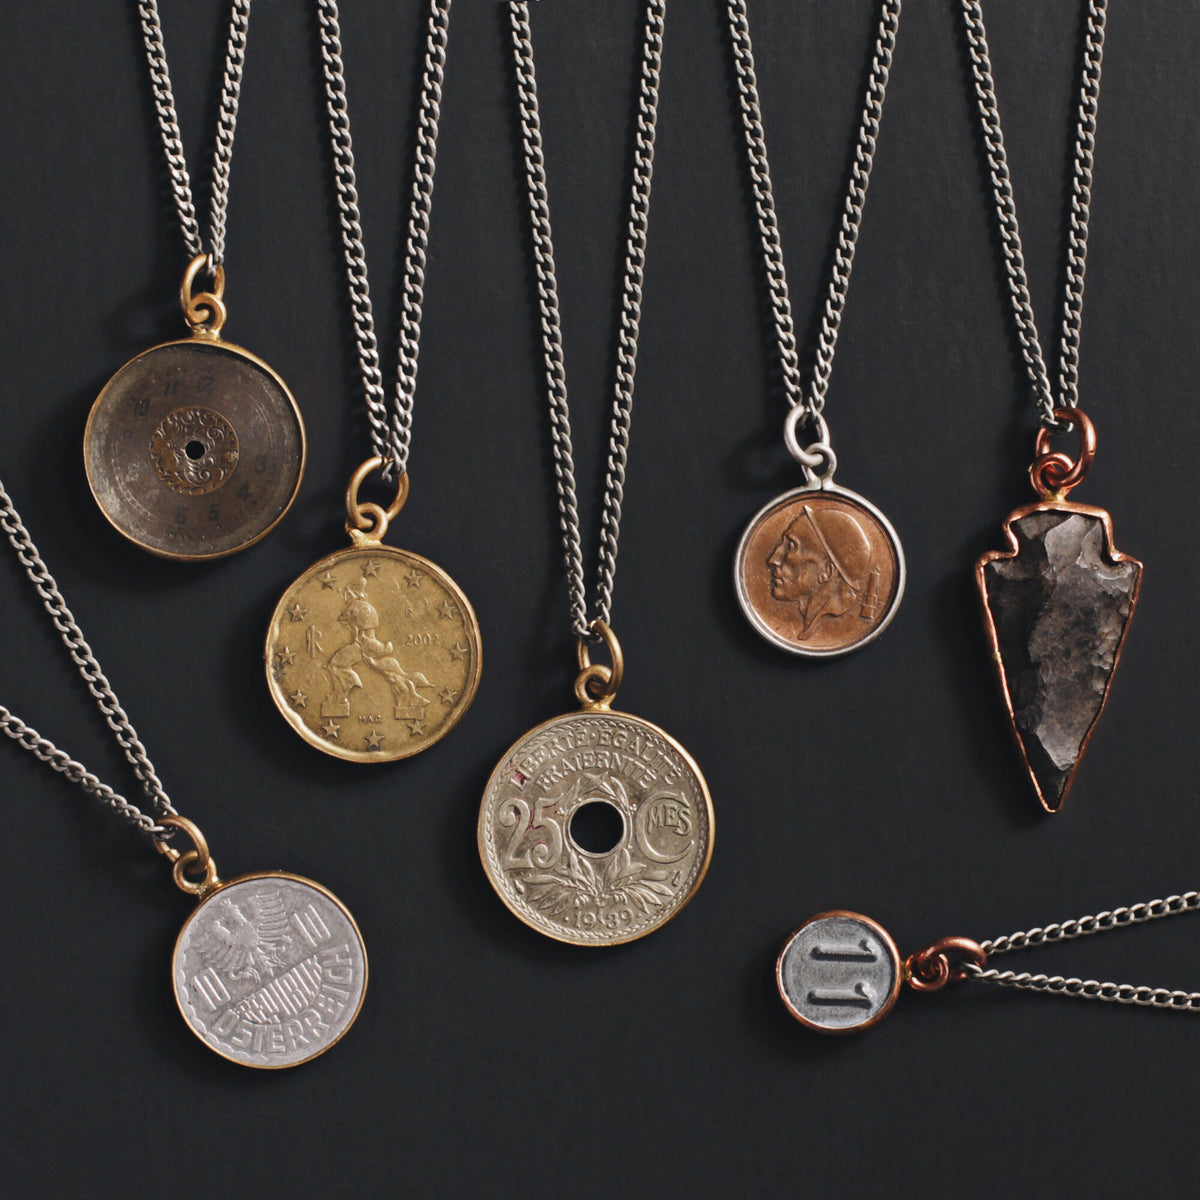 New Men's Jewelry Releases: Vintage coin necklaces for men. — WE ARE ...